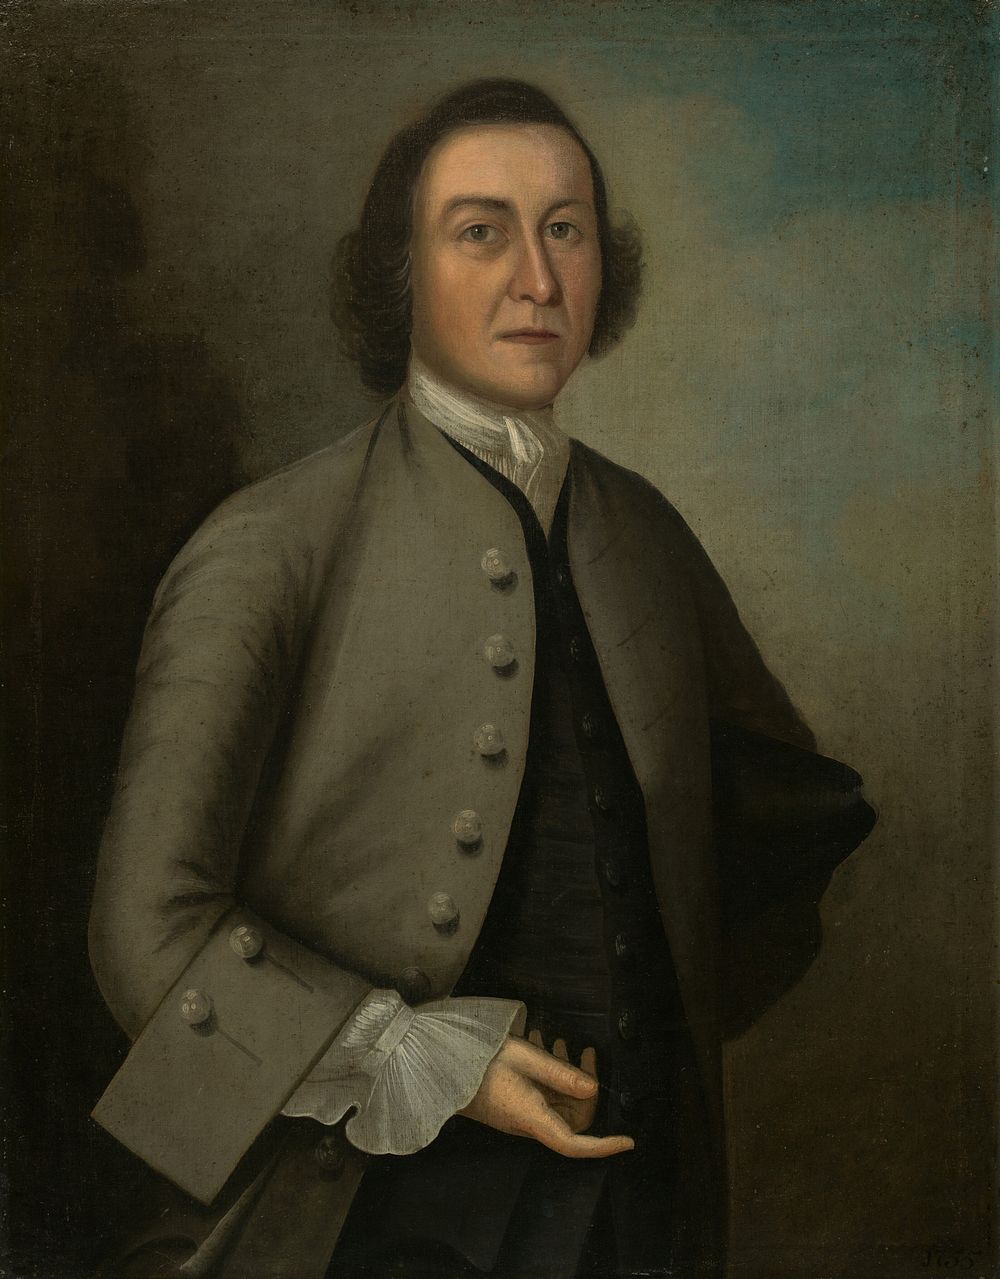 Dr. William Foster (1755) by Joseph Badger.  